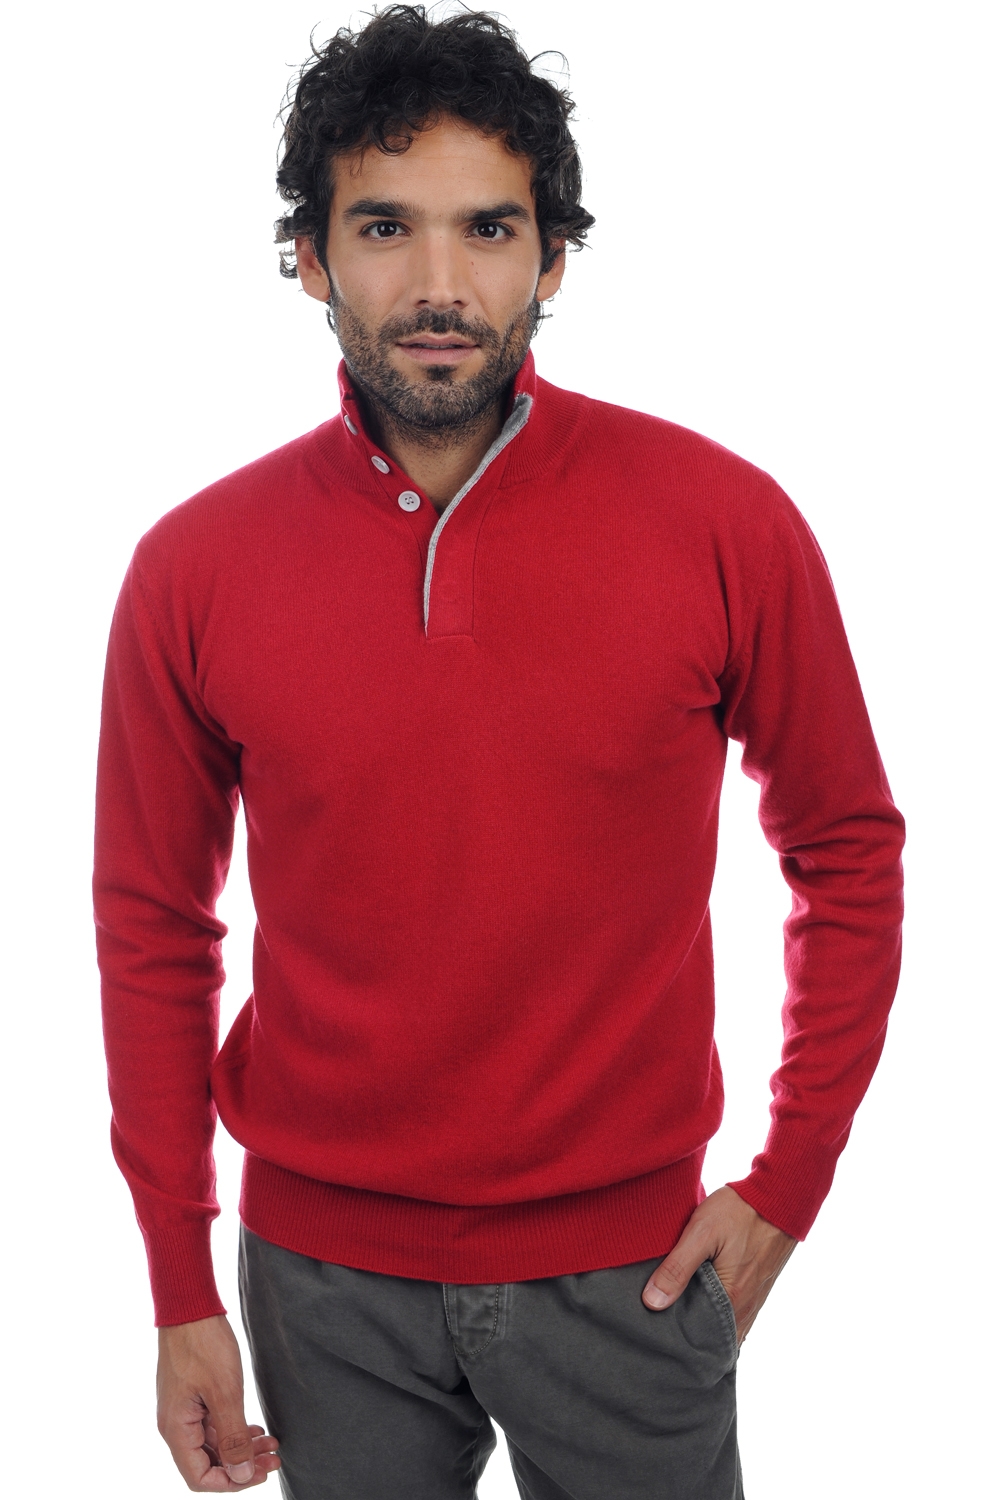 Cachemire pull homme gauvain rouge velours flanelle chine 2xl